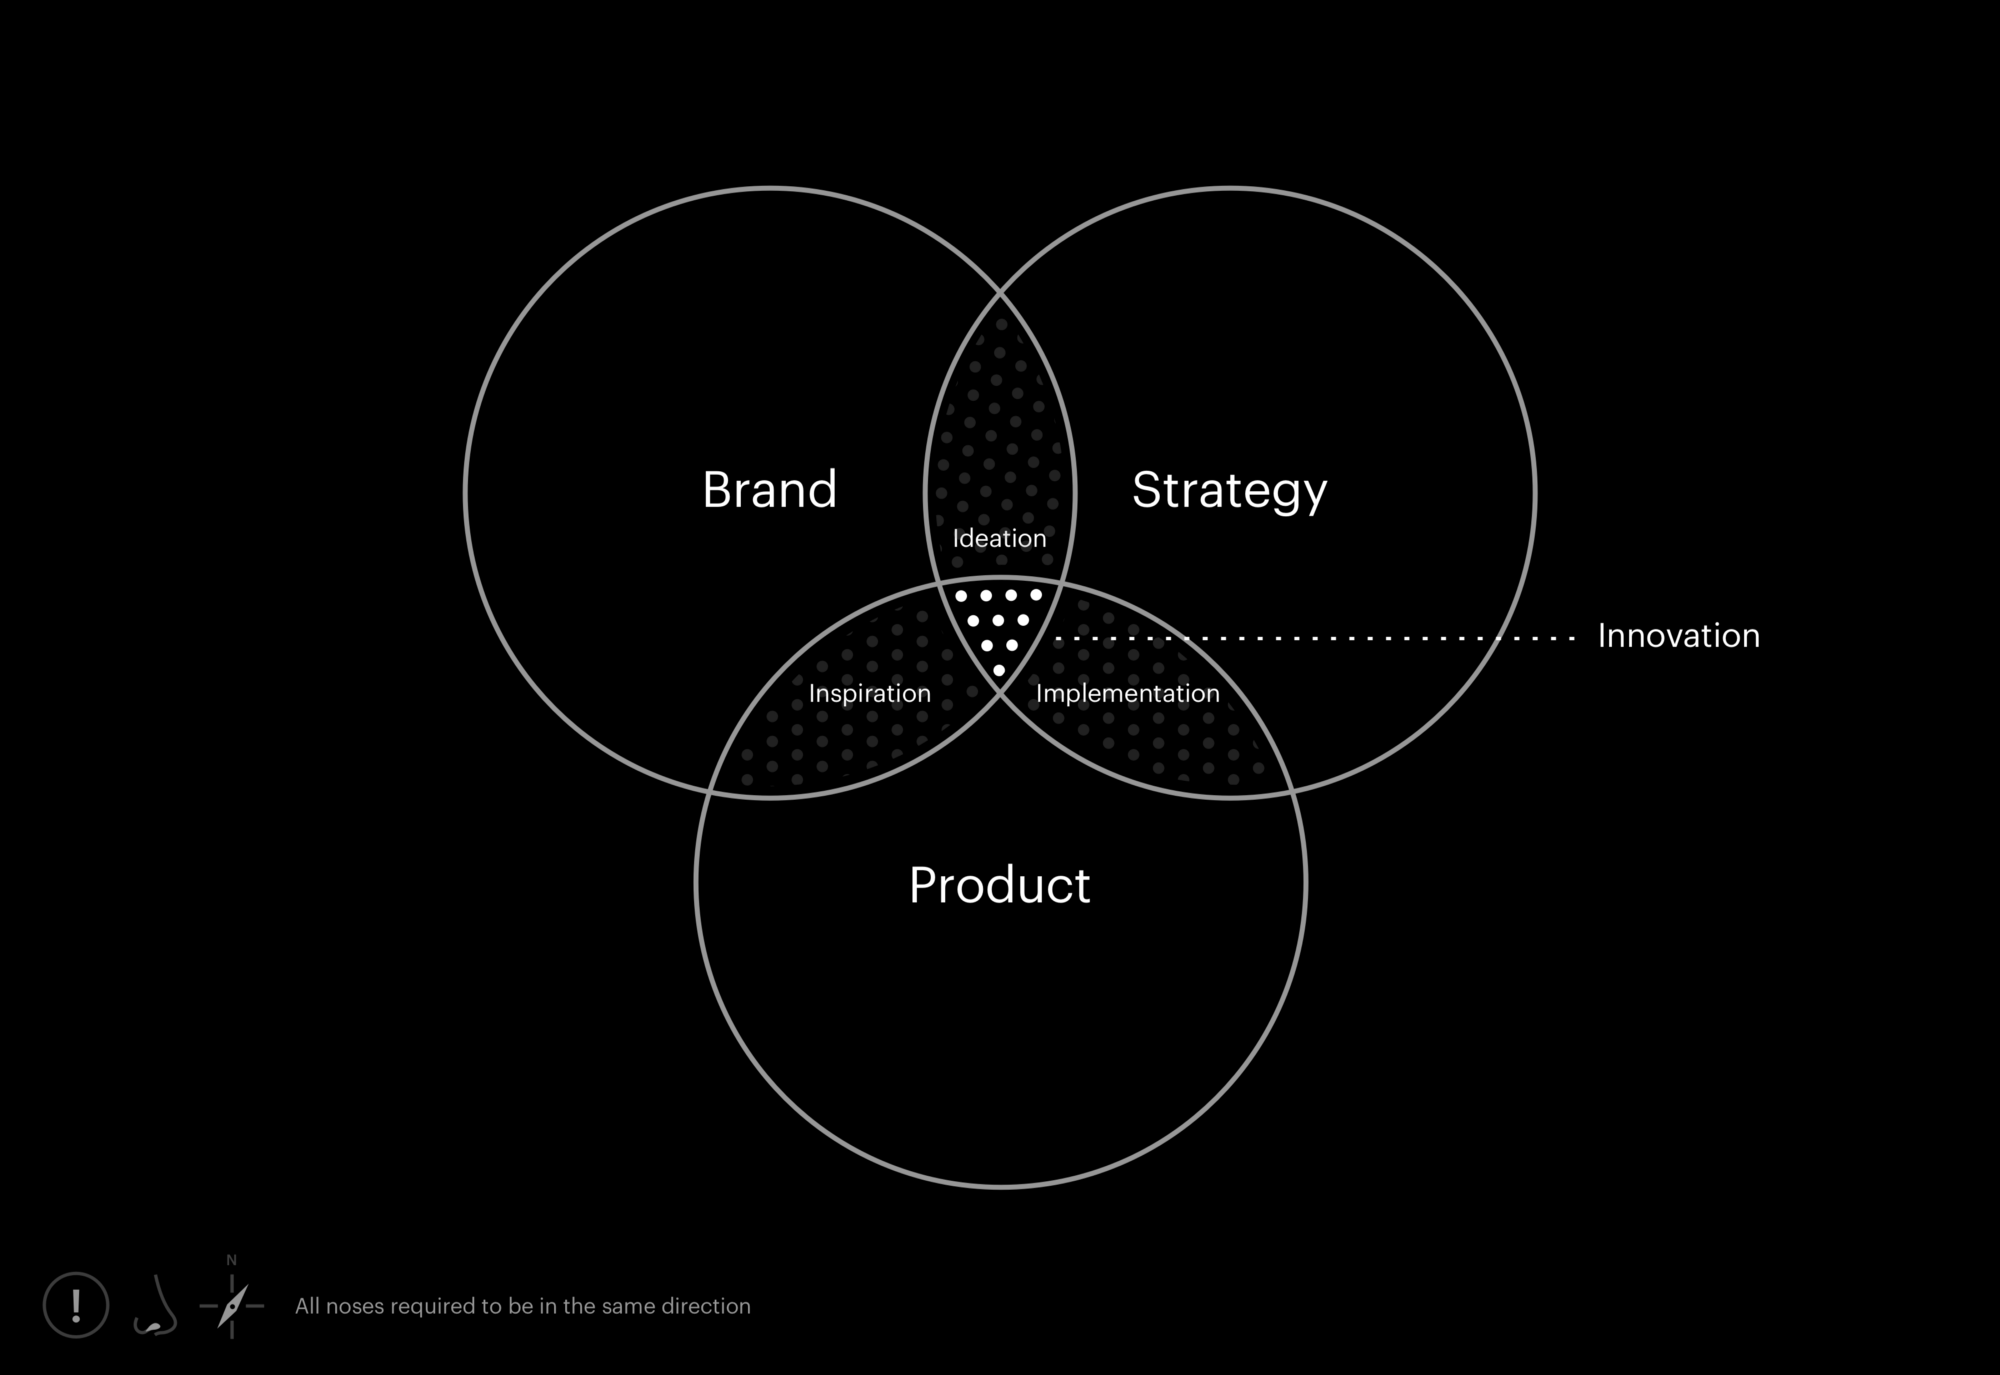 Studio Naam diagram for our services. It shows how brand, strategy and product are the basic pillars of our innovation platform.